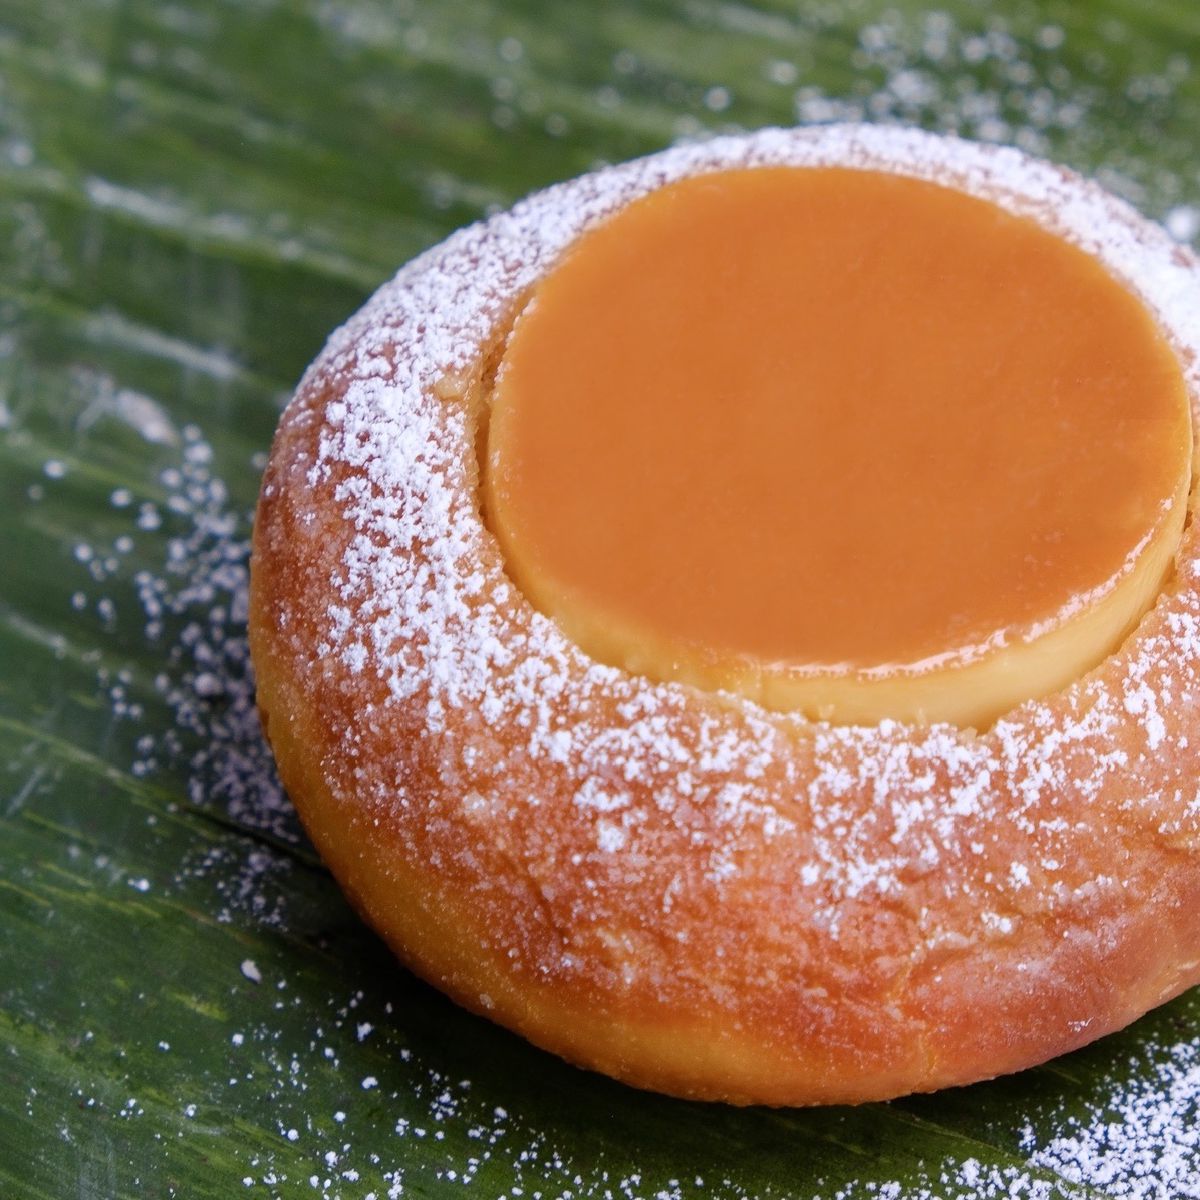 An orange doughnut with a circular flan set in the middle and dusted with white powder on top. The doughnut is set on top of a wide green leaf.